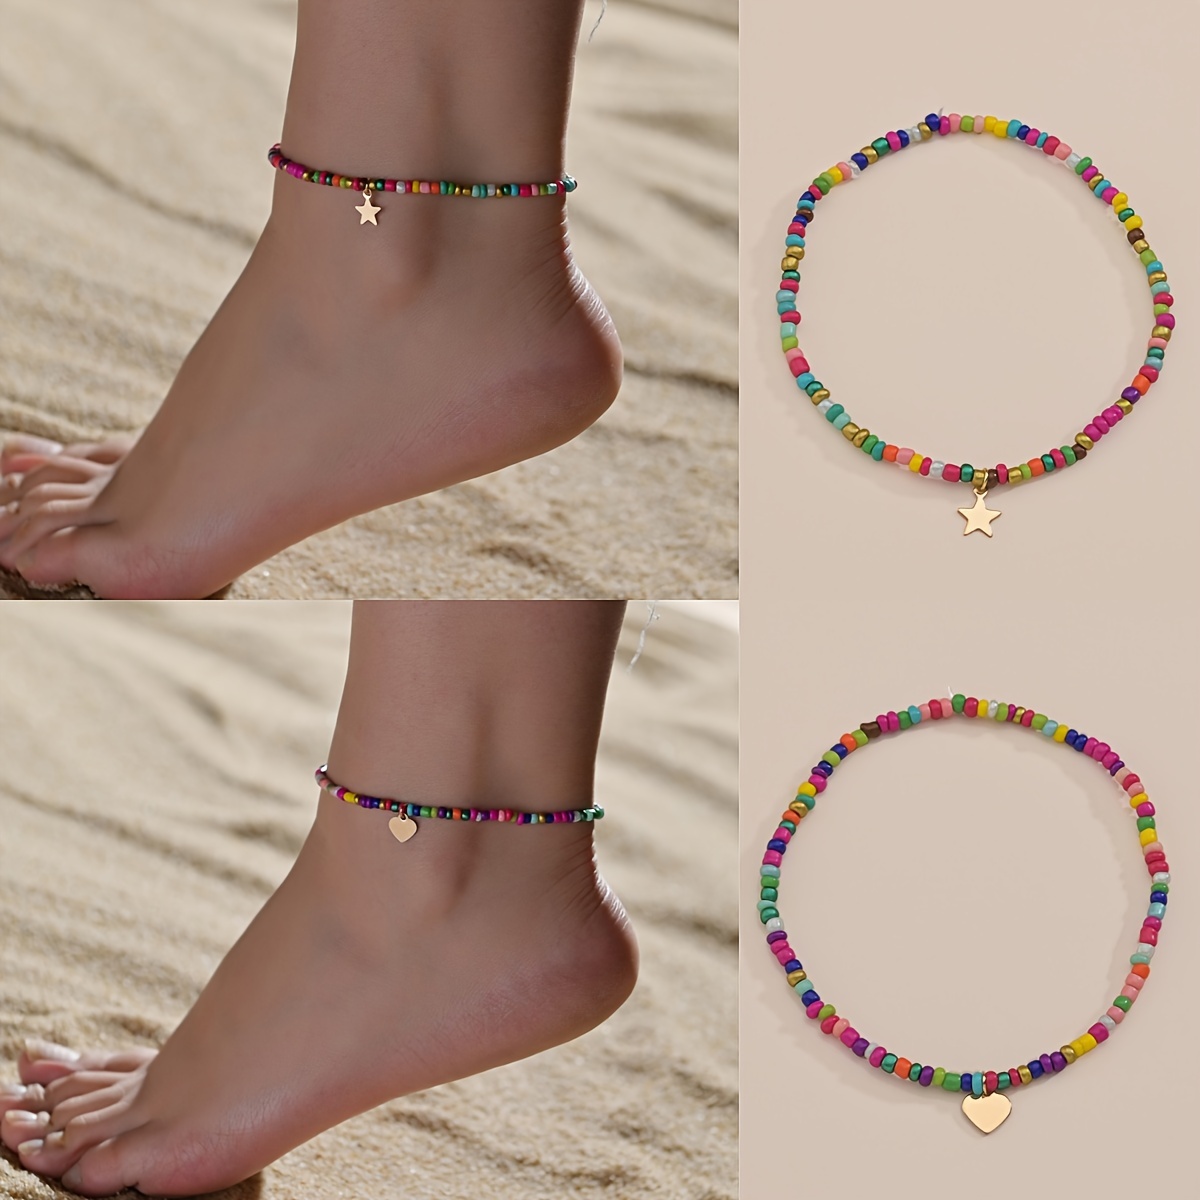 

Bohemian Style Colorful Seed Bead Anklet With Heart & Star Charms For Women, Beach Vacation Accessory, Adjustable Summer Ankle Bracelet